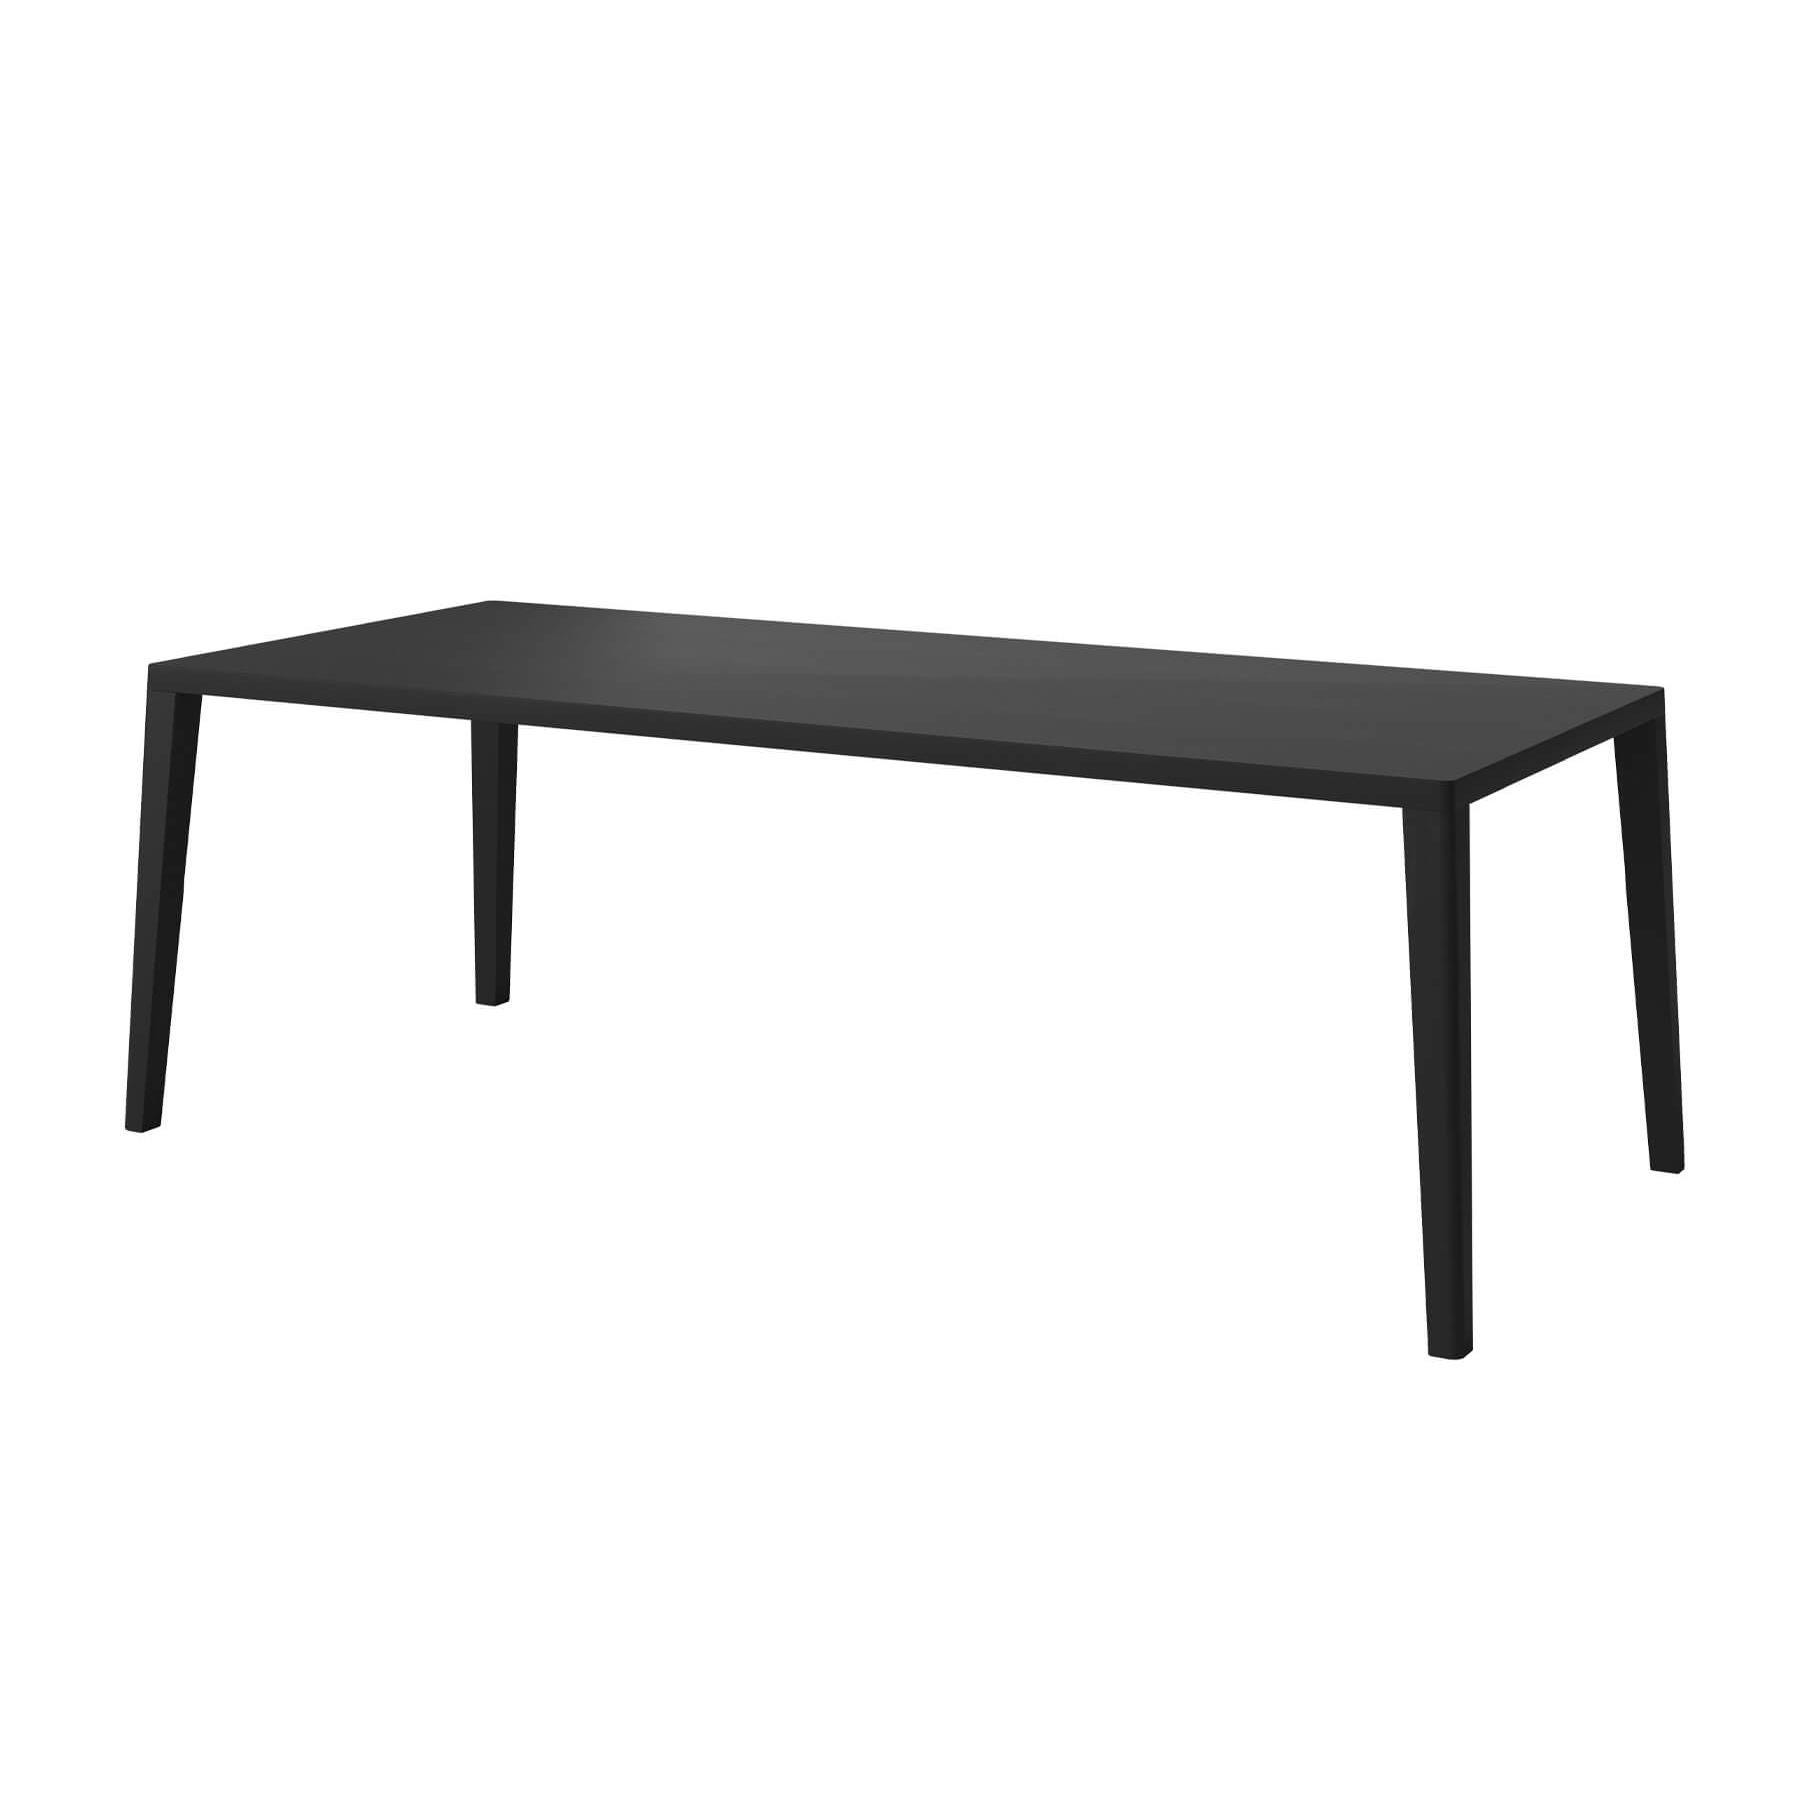 Bolia Graceful Dining Table 220 X 95cm Black Stained Legs Without Extension Leaves Designer Furniture From Holloways Of Ludlow